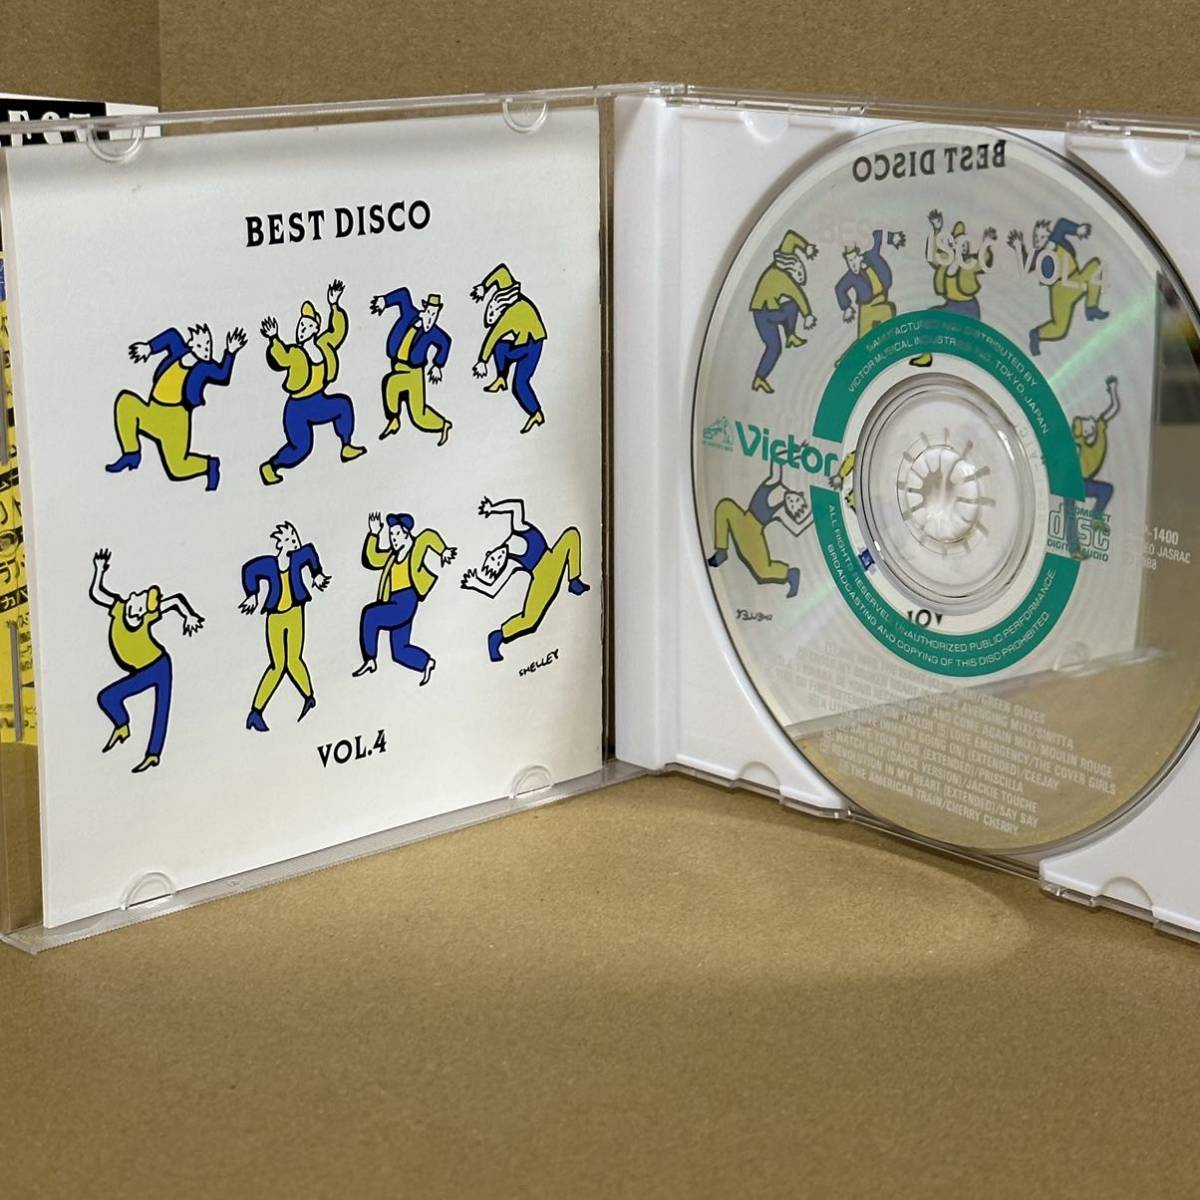 [CD] BEST DISCO VOL.4 / : GREEN OLIVES JIVE INTO THE NIGHT : MOULIN ROUGE / D.J. WANNA BE YOUR RECORD : CEEJAY / A LITTLE LOVE